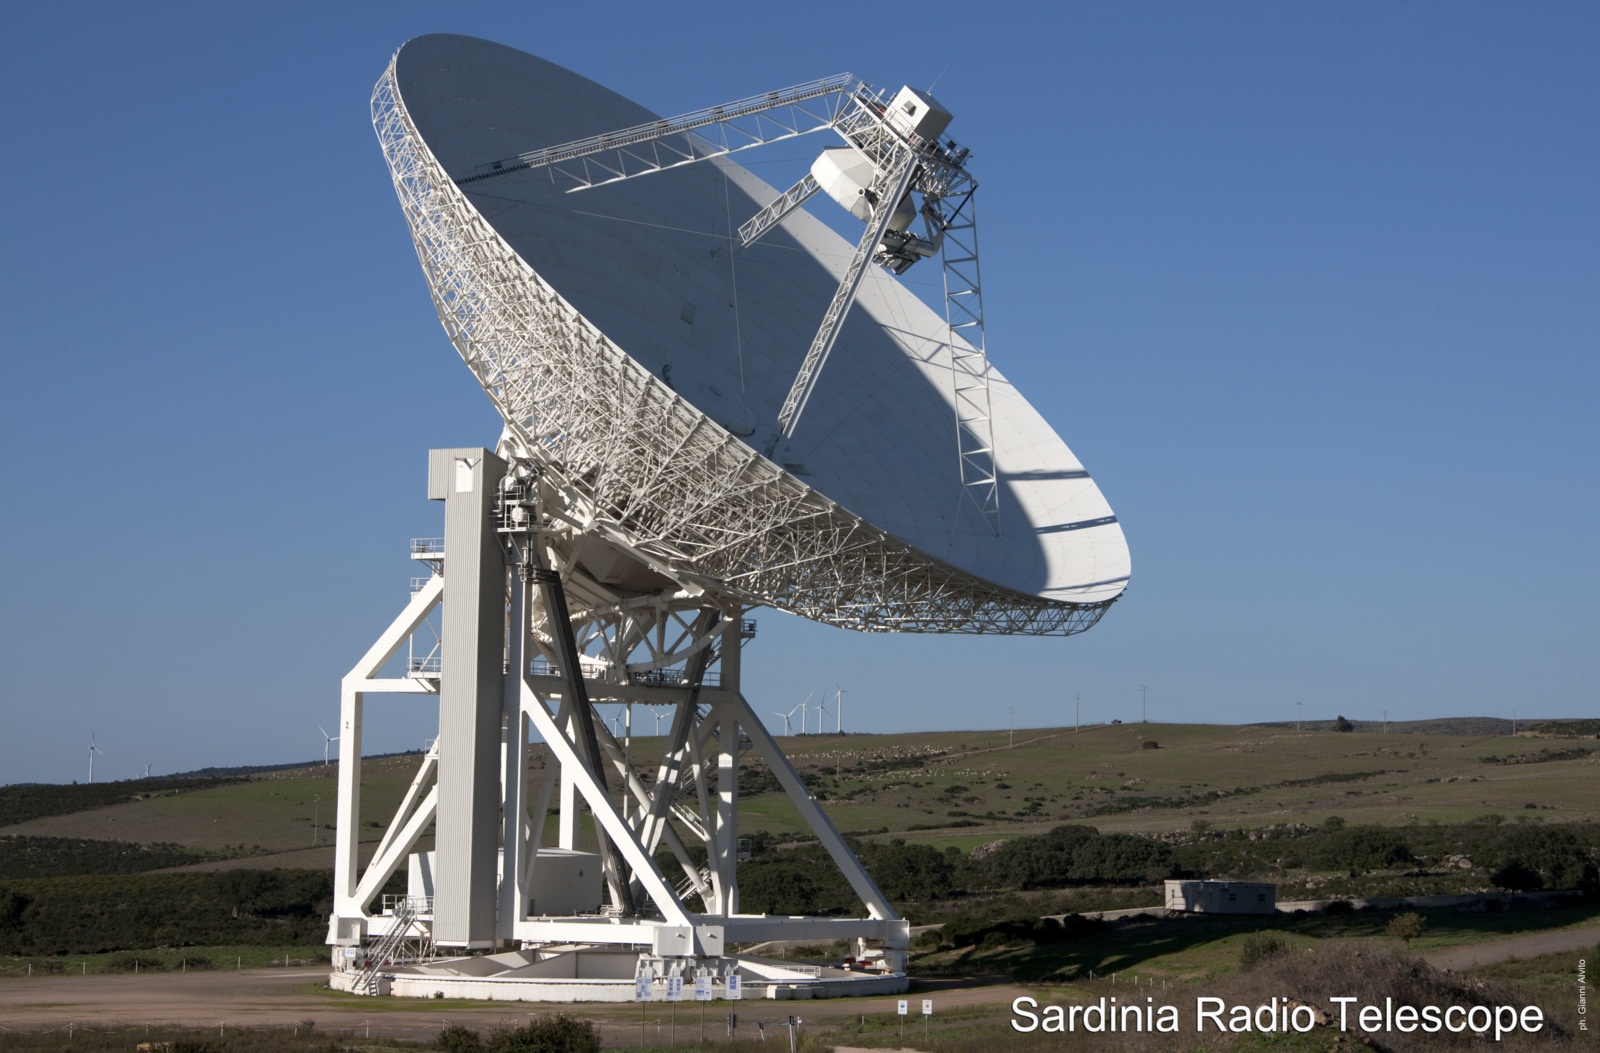 Discovered for the first time the “birthplace” of a fast radio burst